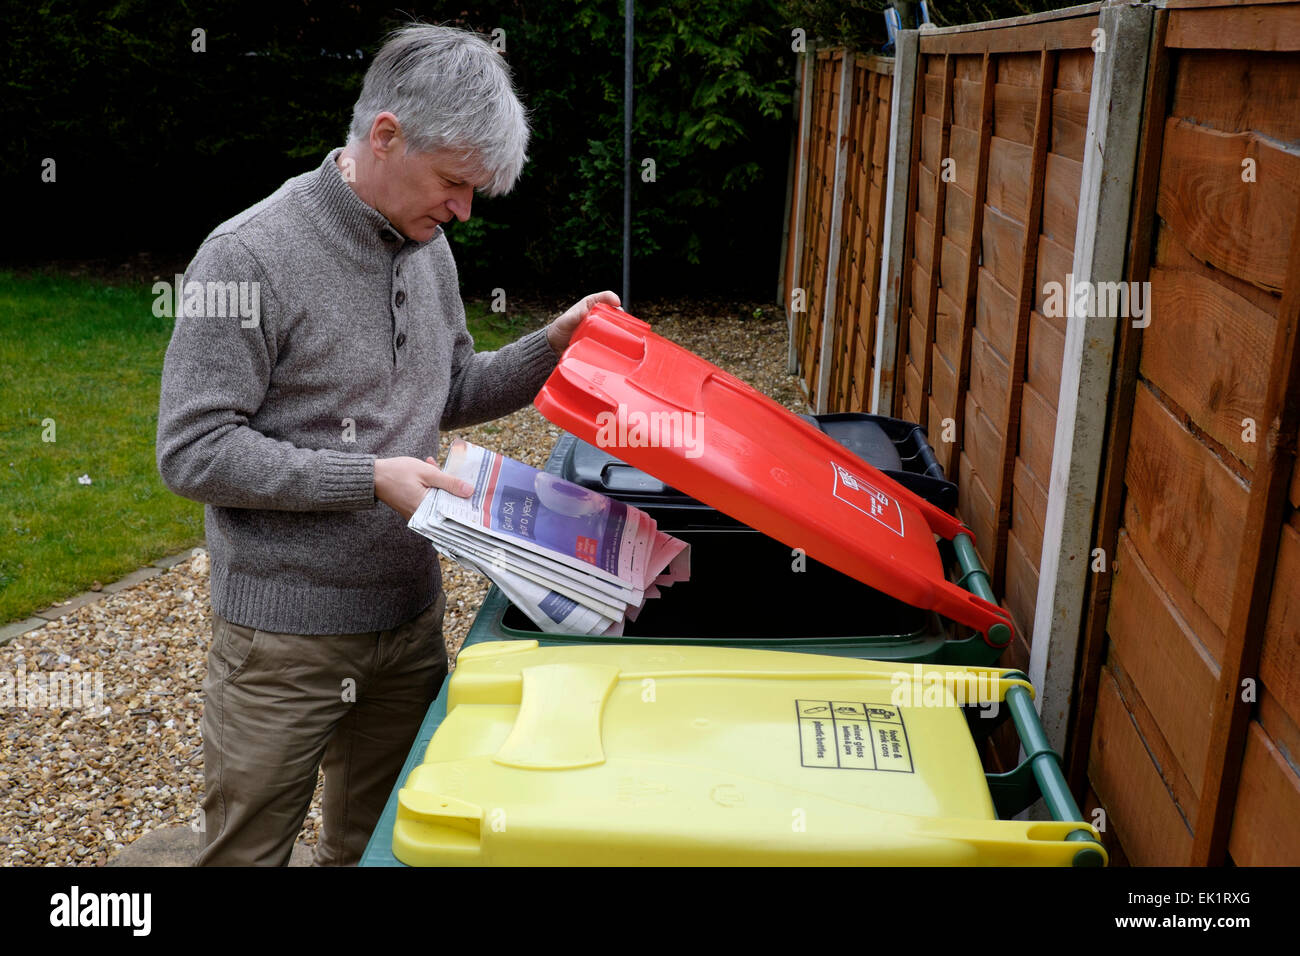 Many councils provide wheelie-bins for the recycling of household waste such as paper, plastic, tin and glass. Stock Photo